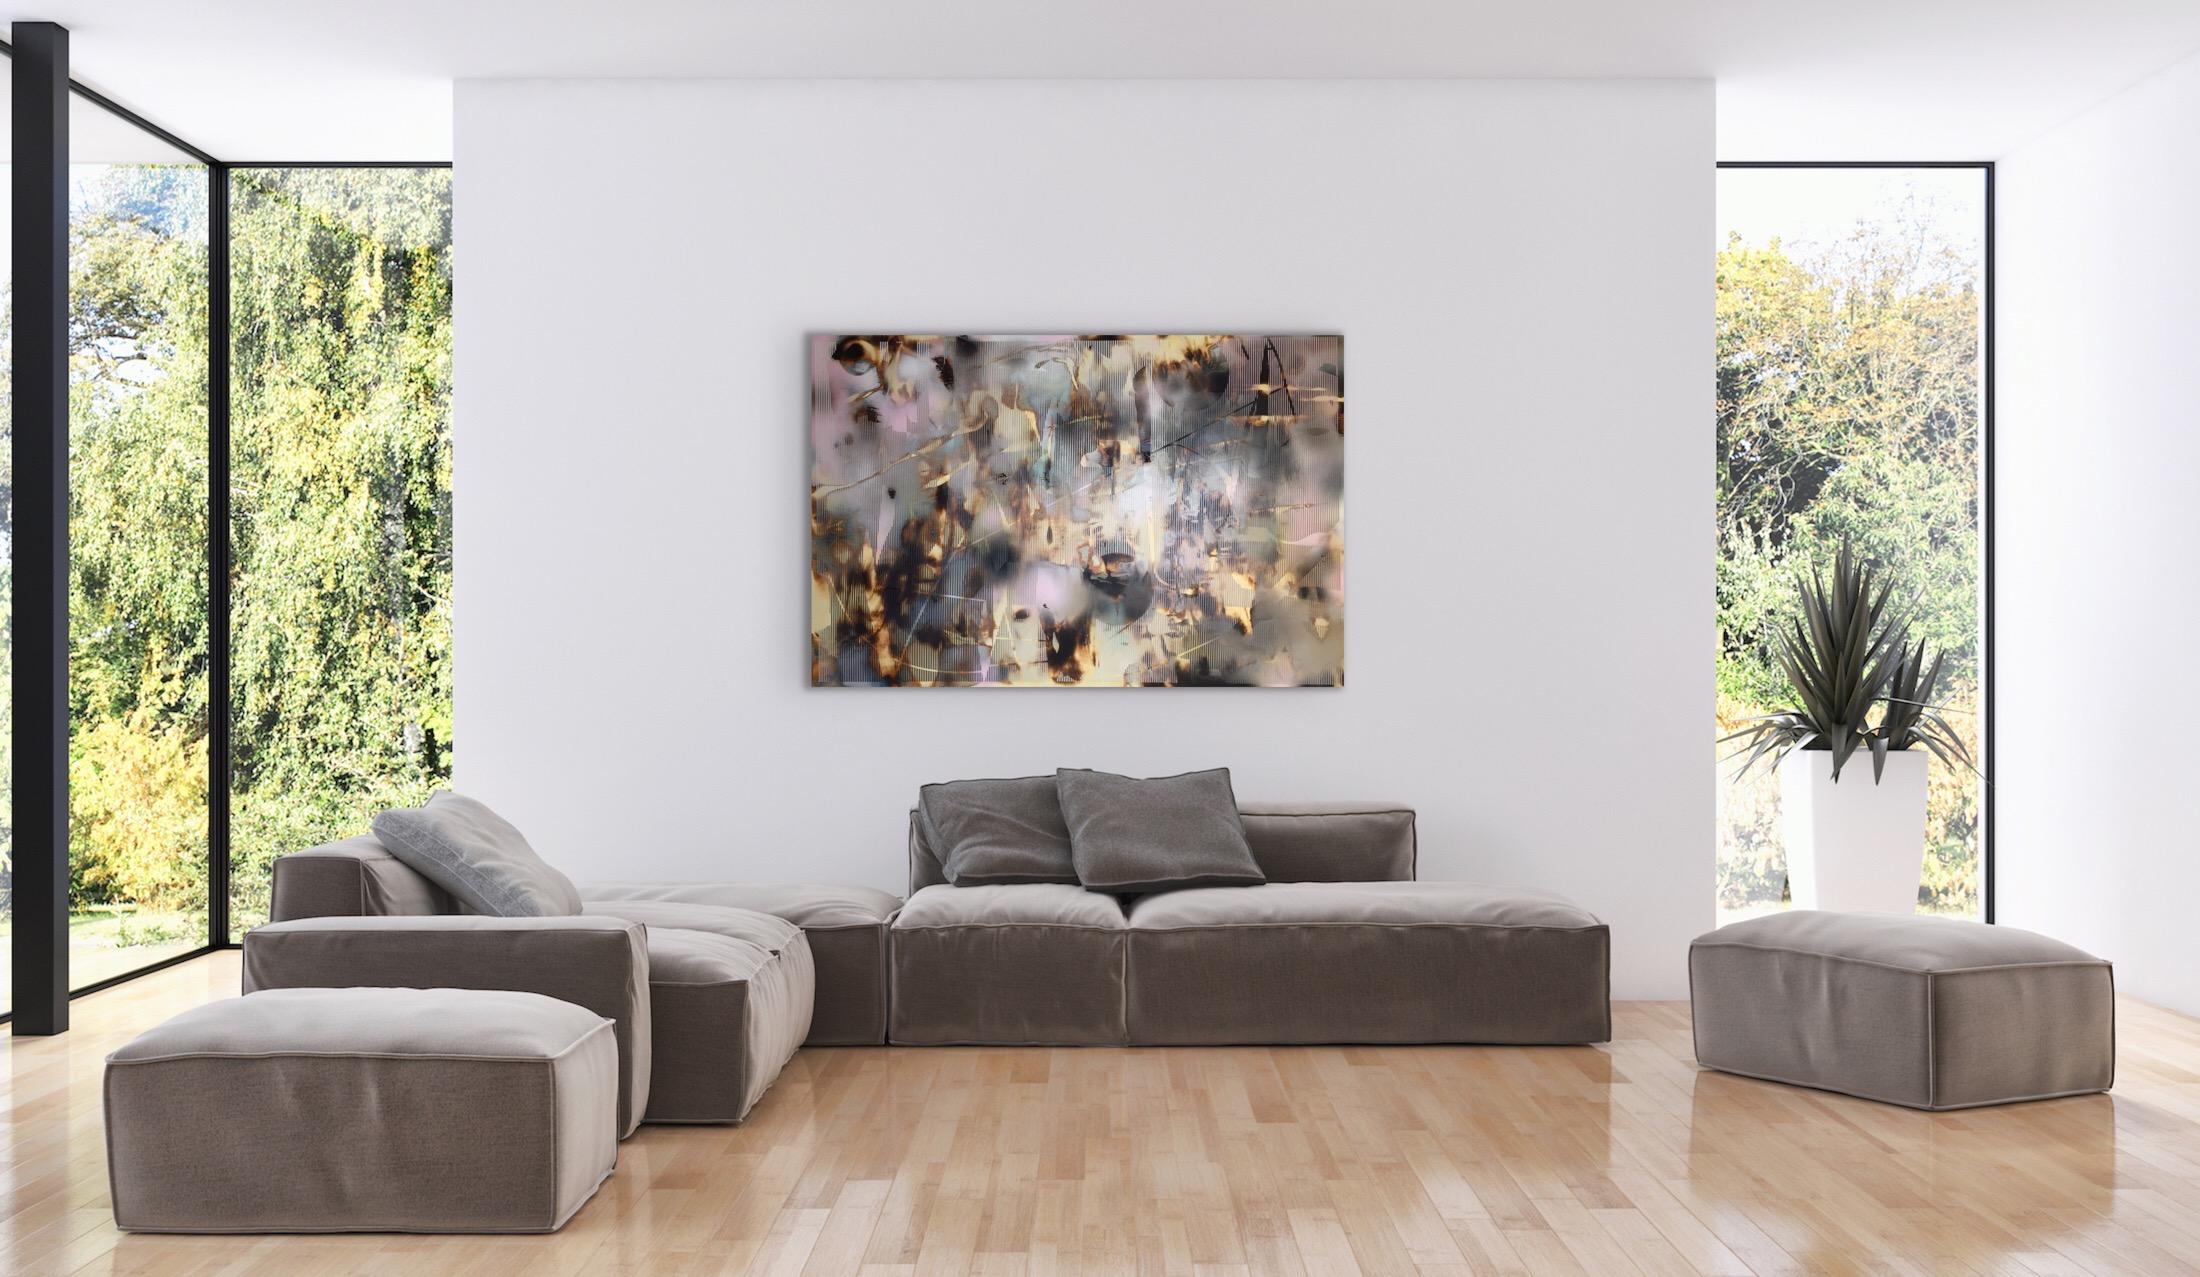 Screen tbd1 (abstract grid wood painting contemporary neutrals natural motifs) - Gray Abstract Painting by Melisa Taylor Metzger